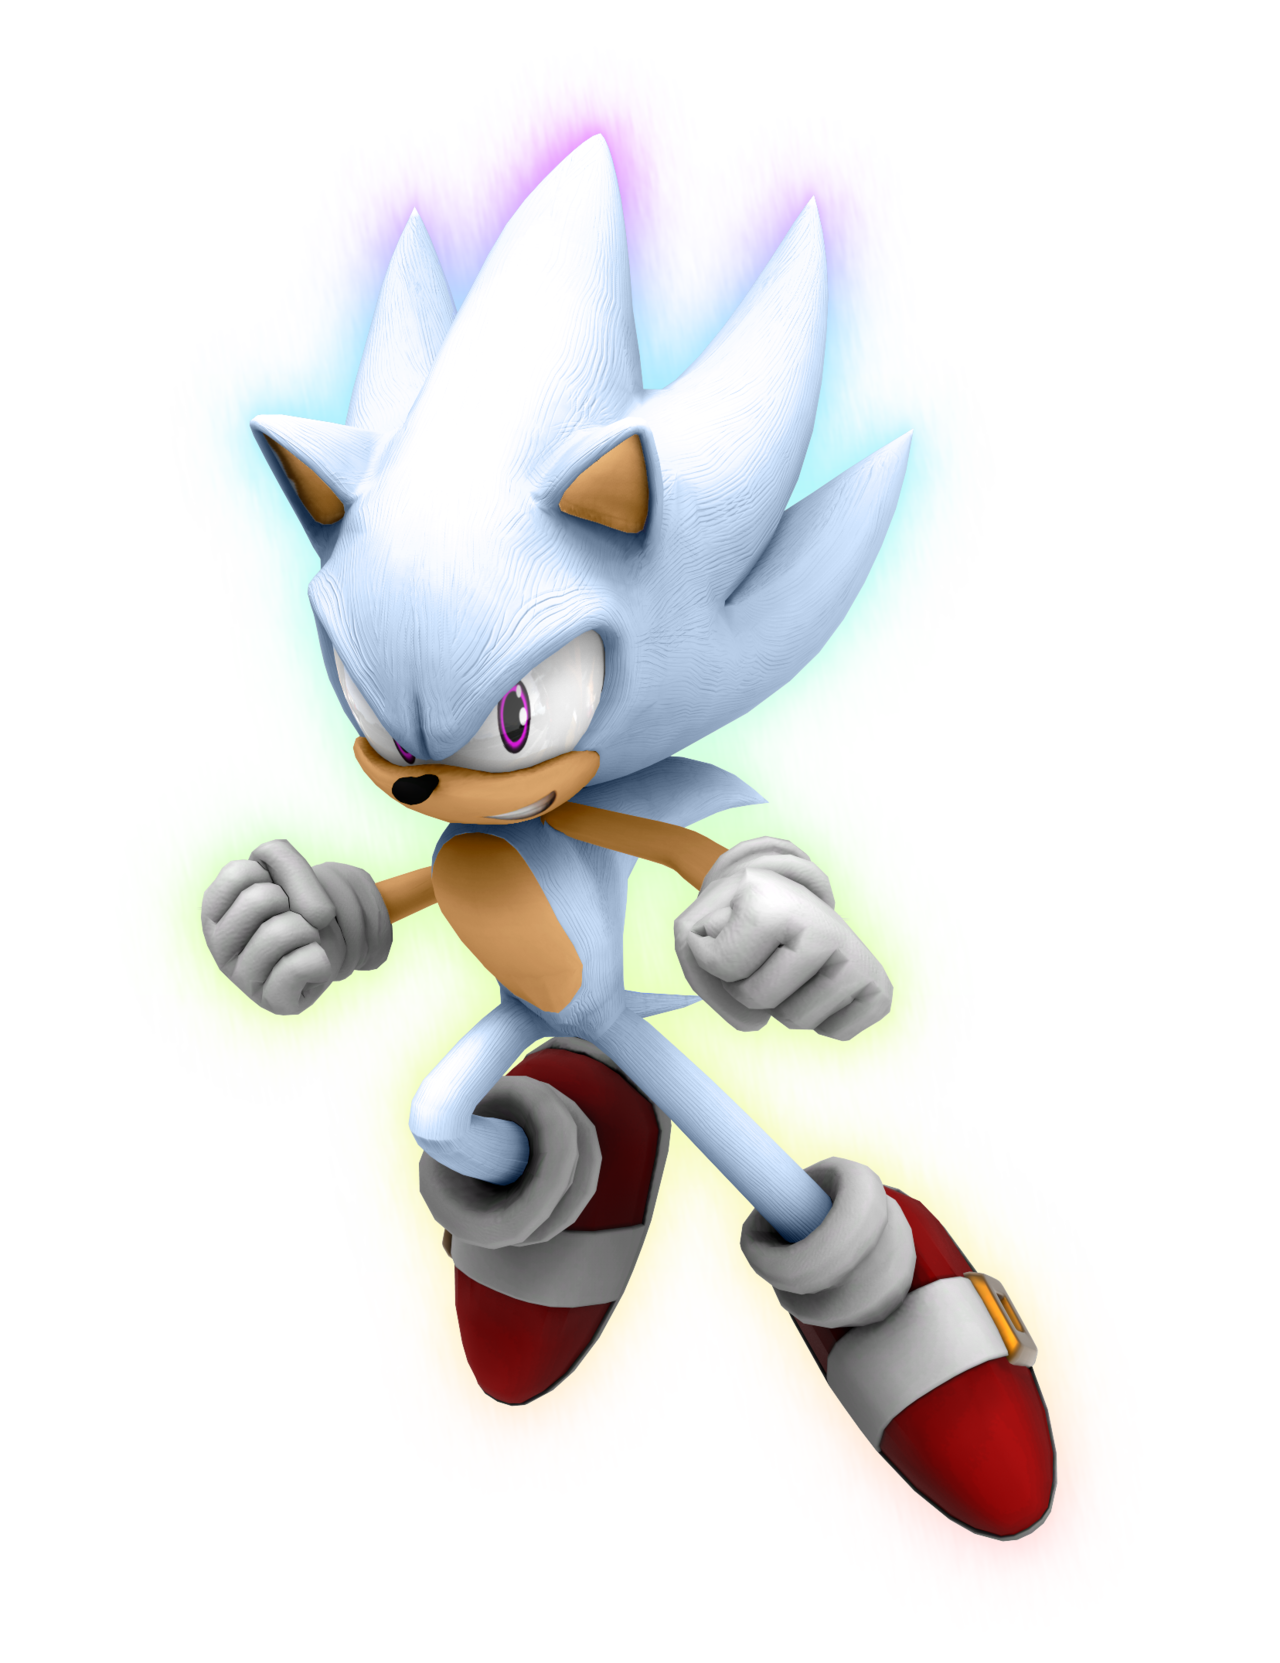 How does Sonic turn into Hyper Sonic?